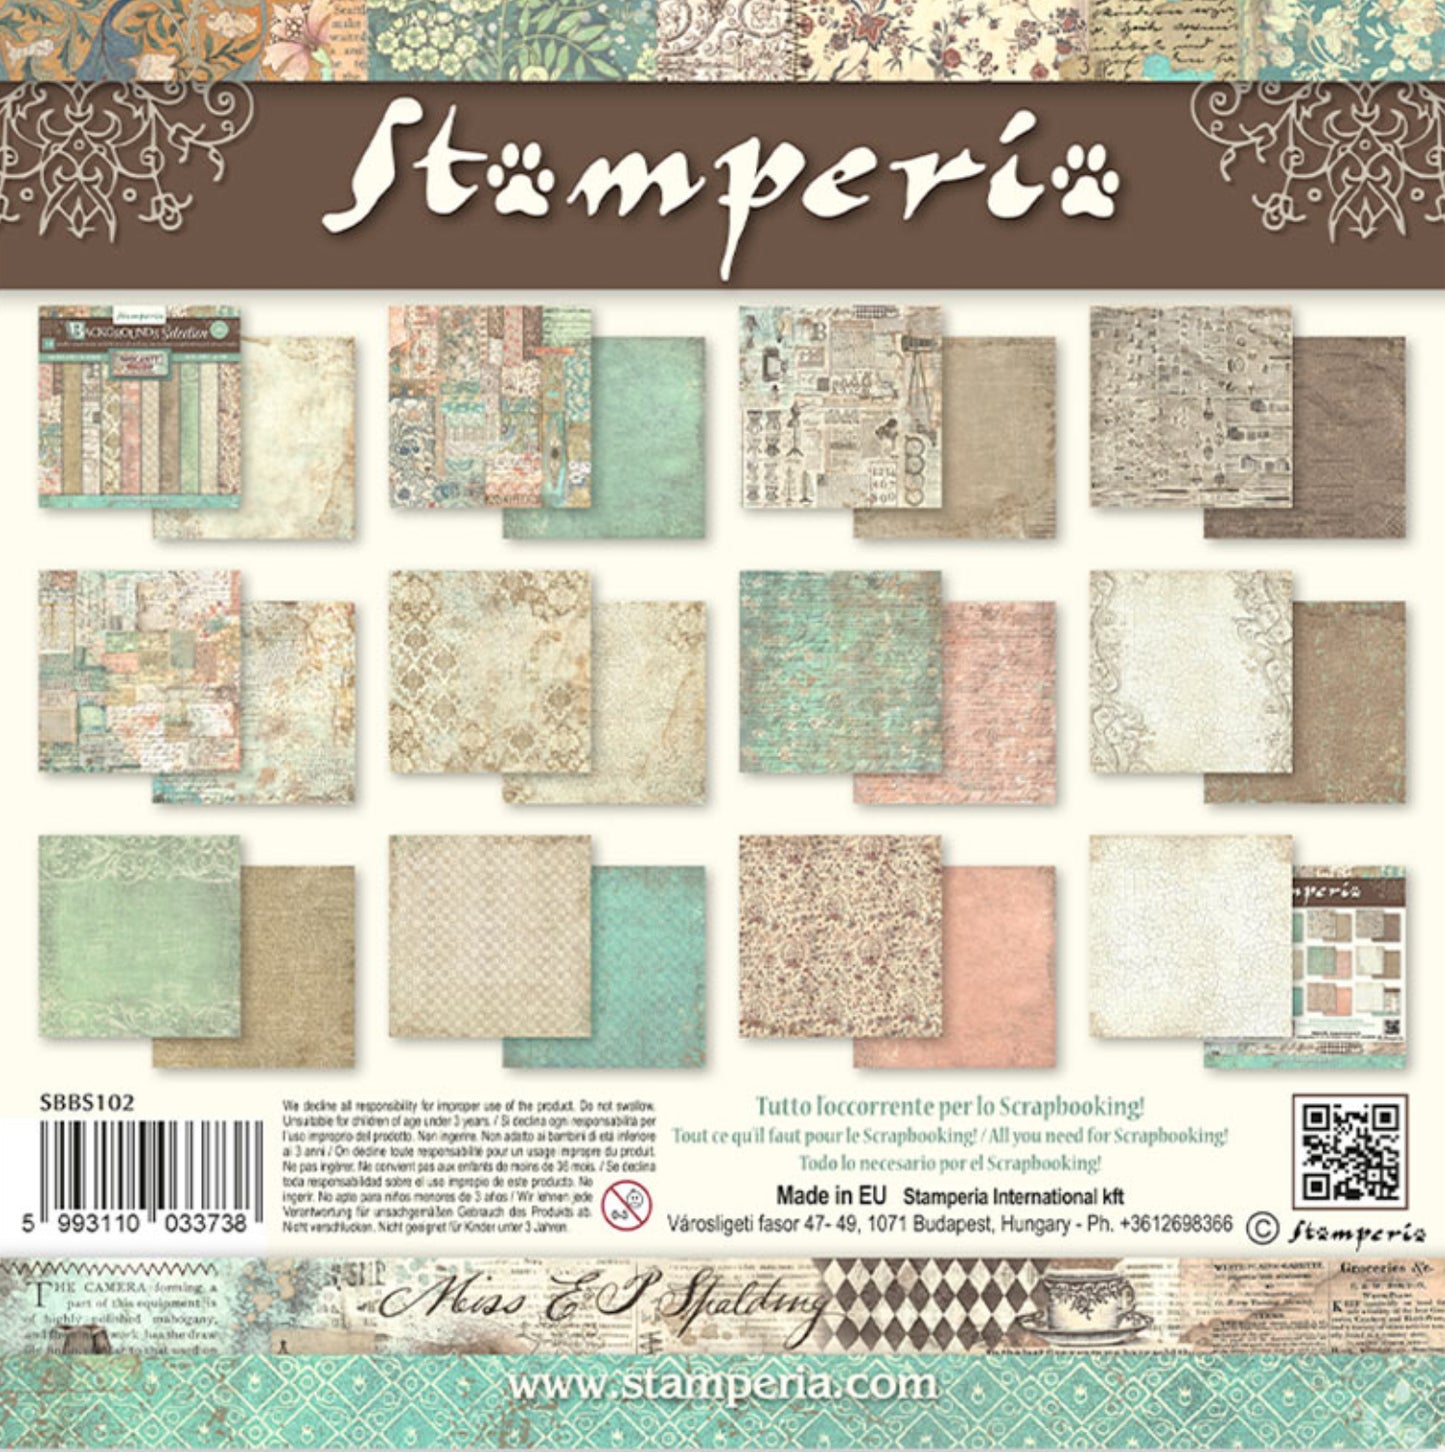 Stamperia Brocante Antiques Backgrounds 8” x 8” Paper Pad